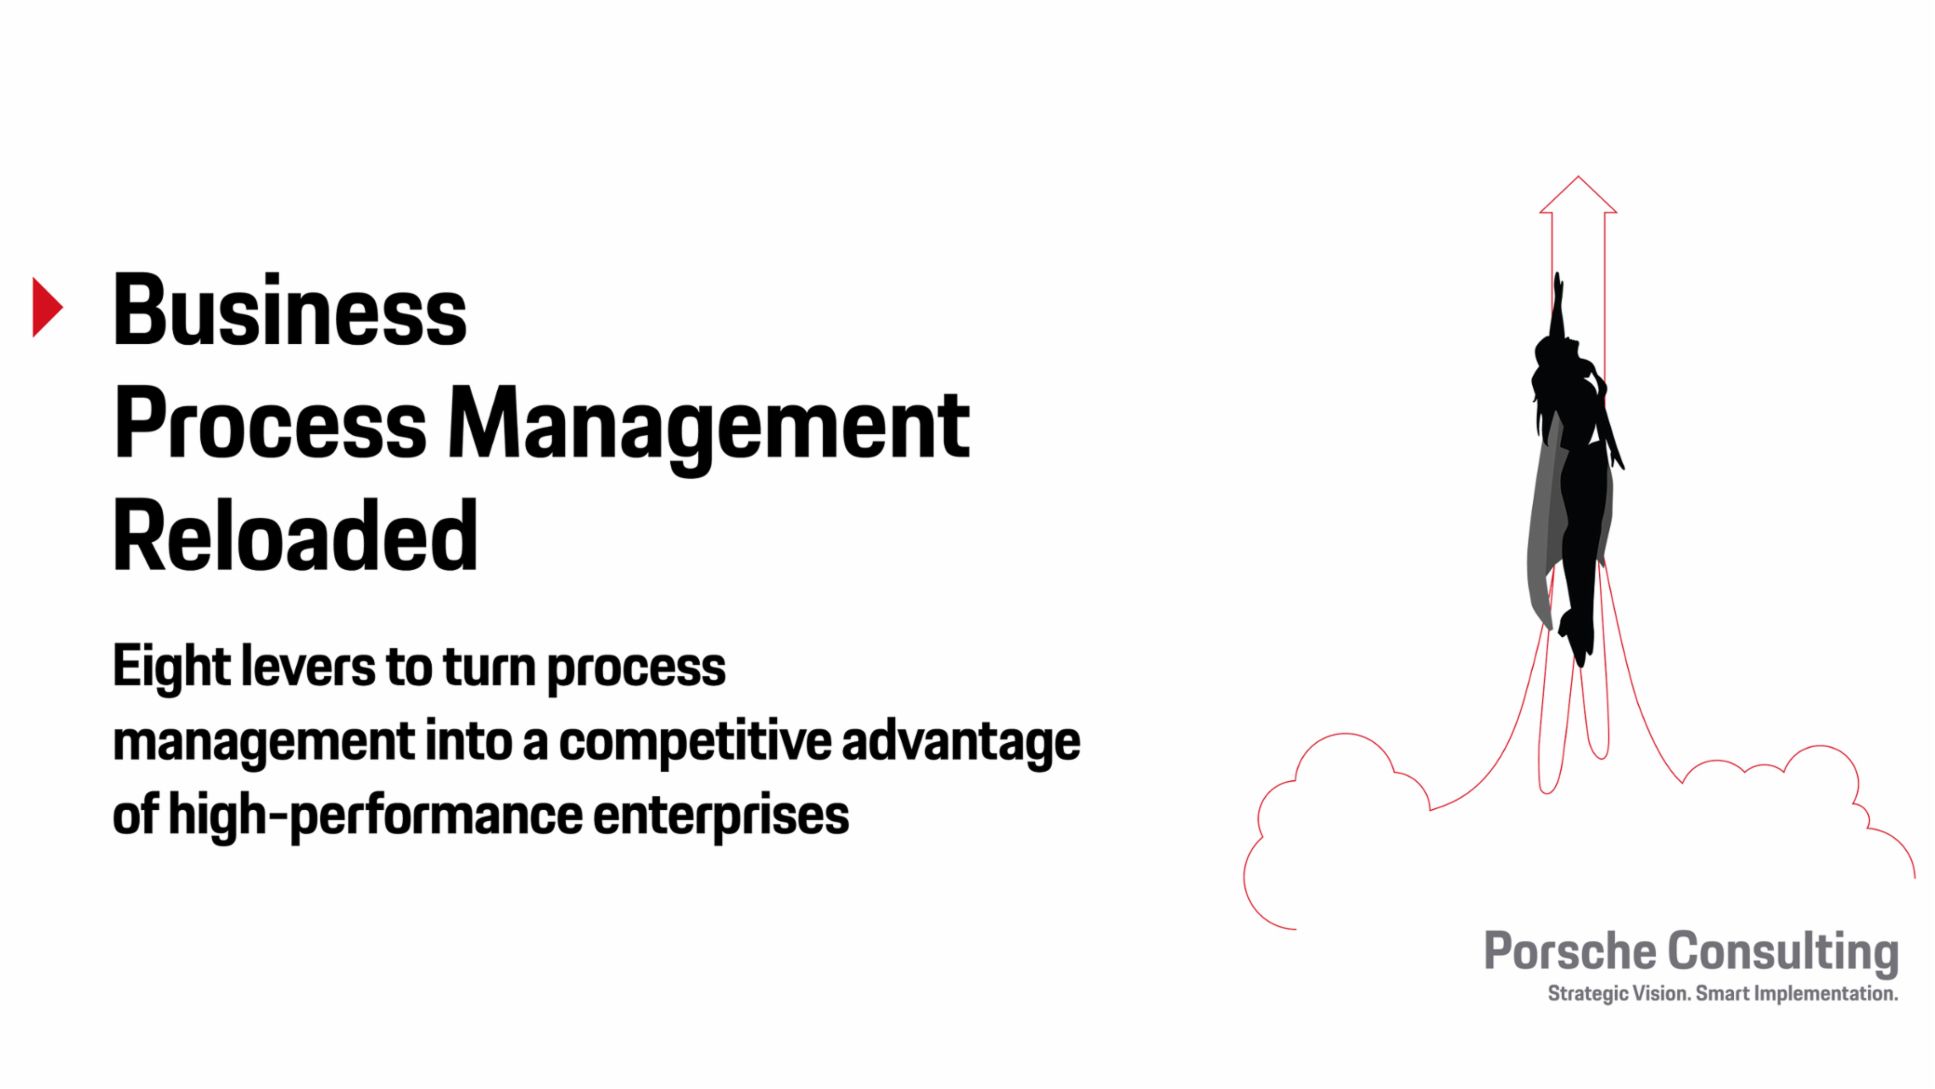 Business Process Management Reloaded, 2019, Porsche Consulting GmbH